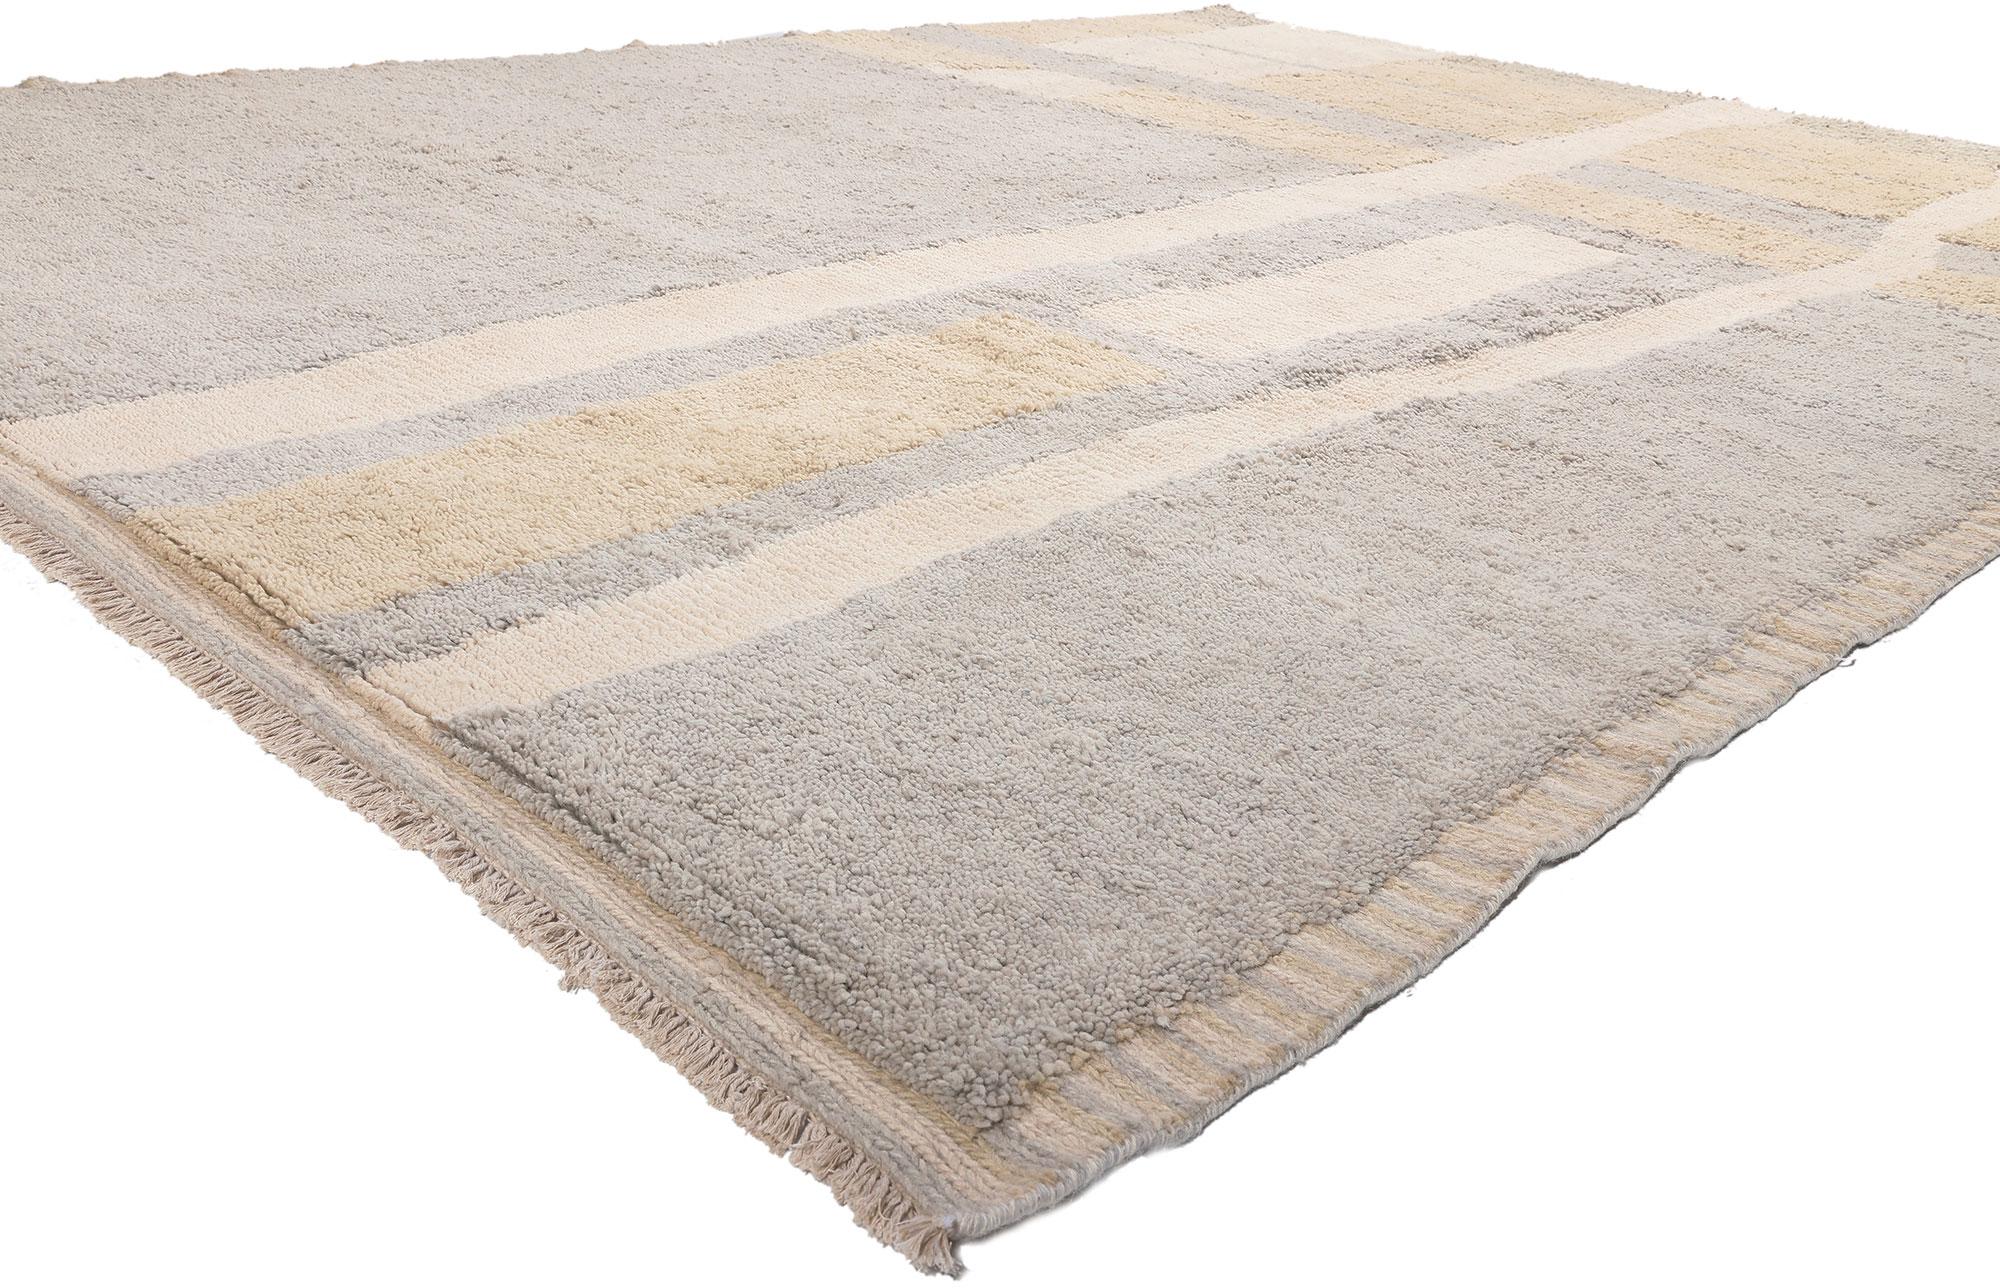 81005 Neutral Earth-Tone Moroccan Rug, 09'00 x 12'00. Reflecting elements of Organic Modern style with incredible detail and texture, this hand knotted wool Moroccan area rug is a captivating vision of woven beauty. The simple silhouette and neutral